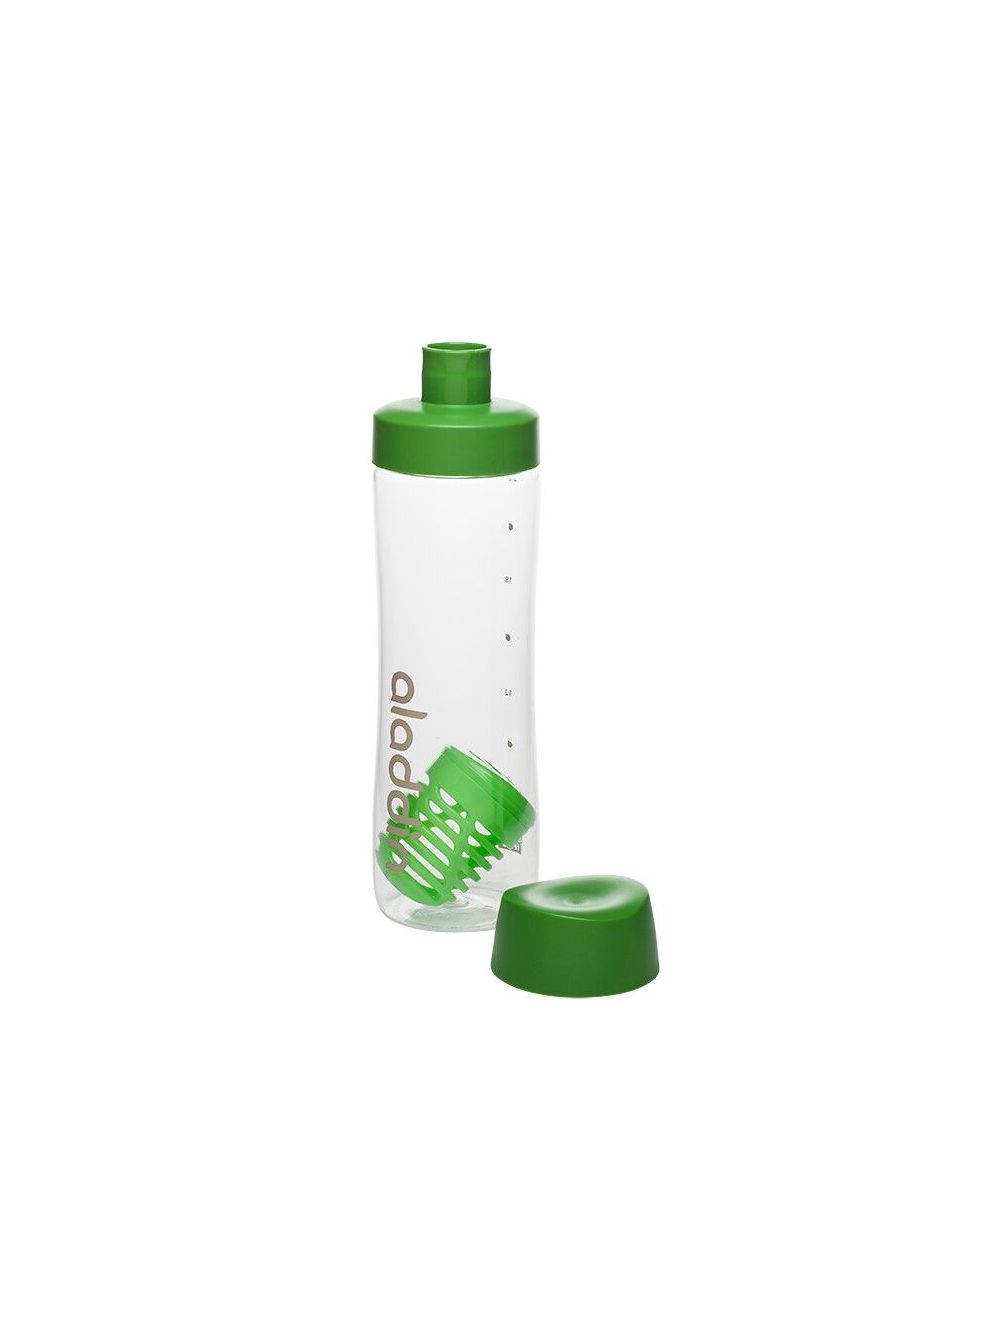 Aladdin Infuse Water Bottle 0.7L Green-10-01785-051